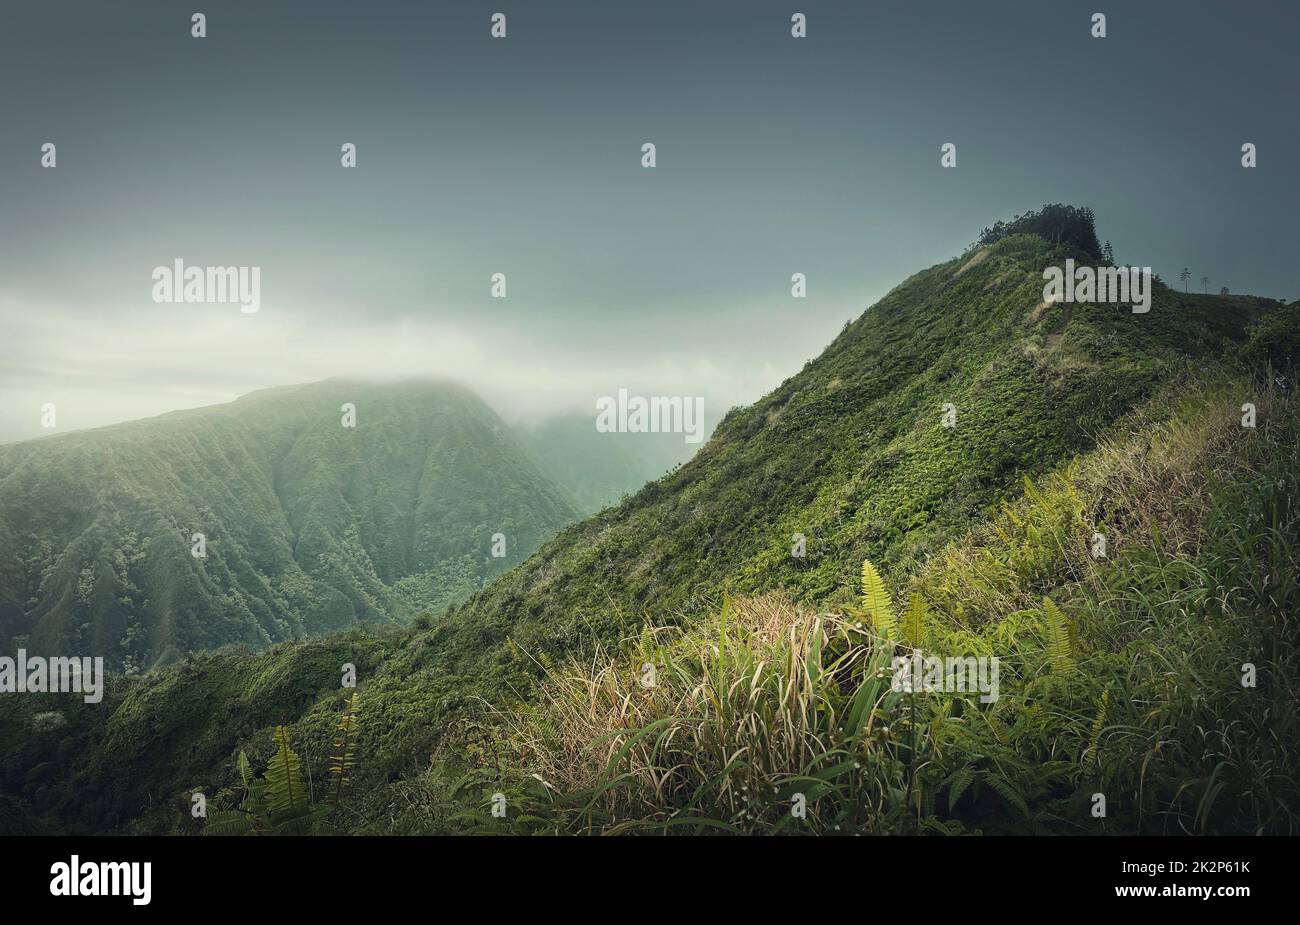 Beautiful view to the green hills in Hawaii, Oahu island. Hiking mountains landscape with vibrant tropical vegetation. Moody weather with foggy clouds over the valley Stock Photo